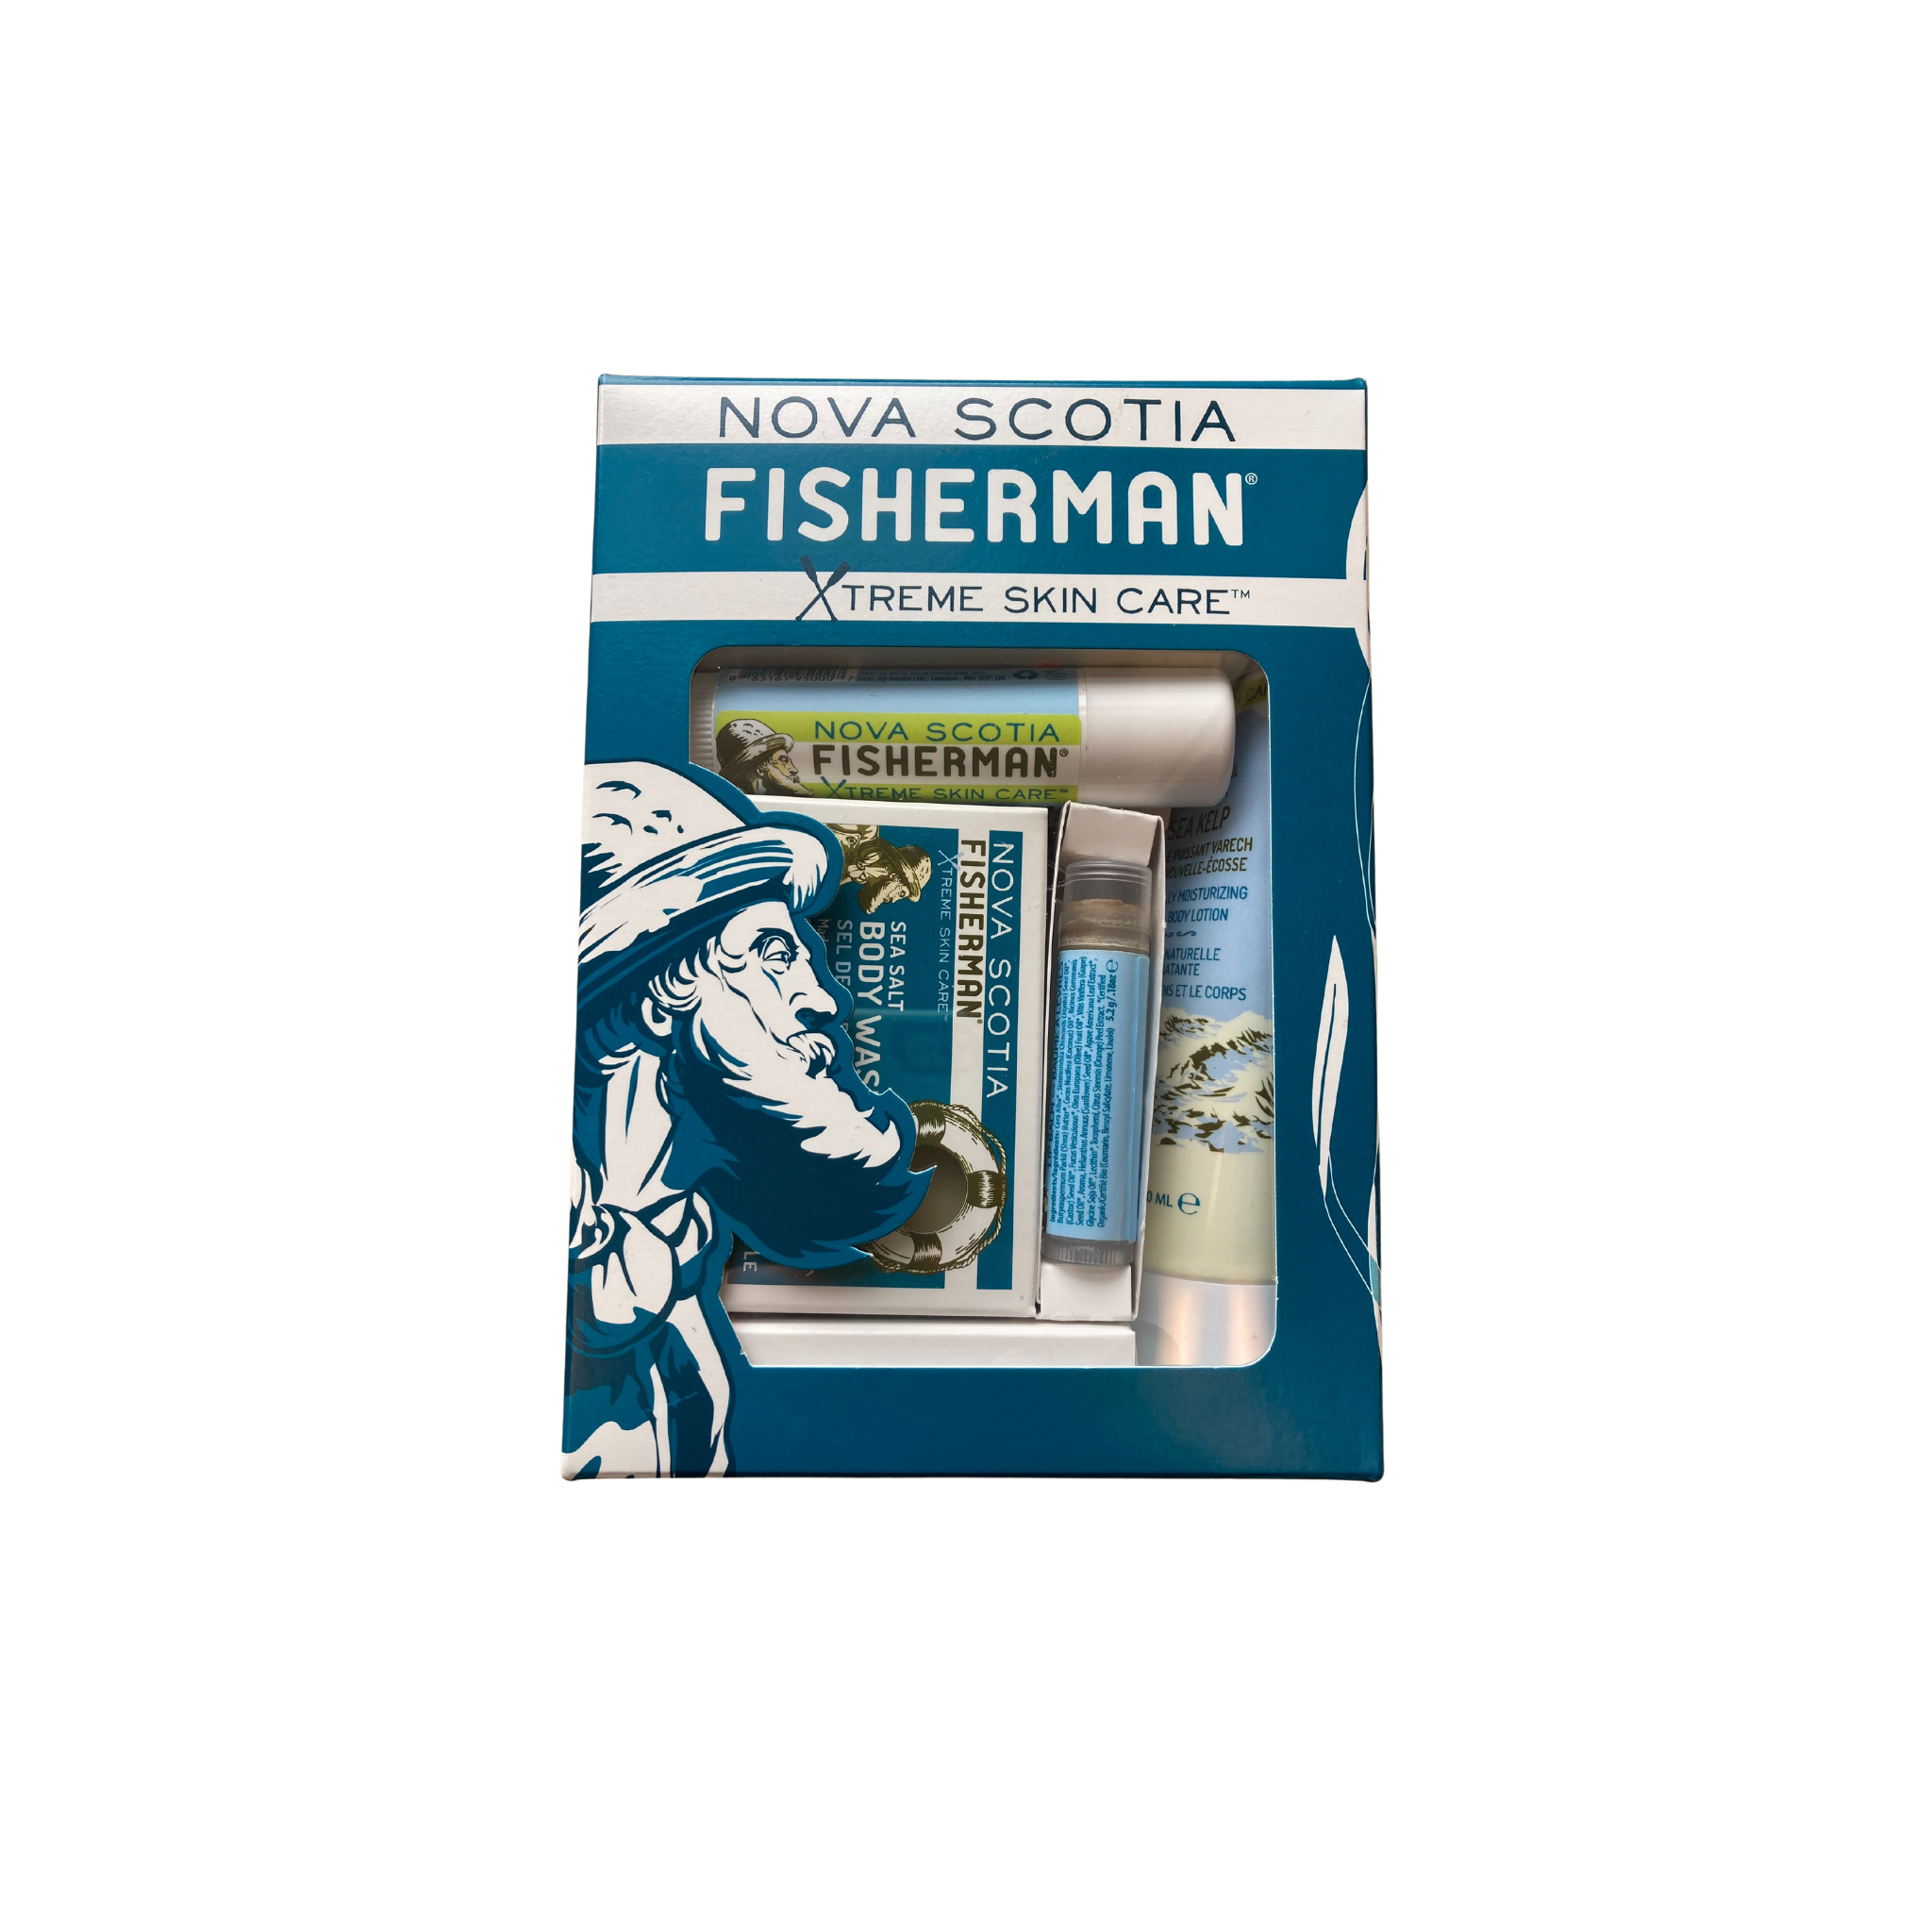 Gift for fisherman who has everything